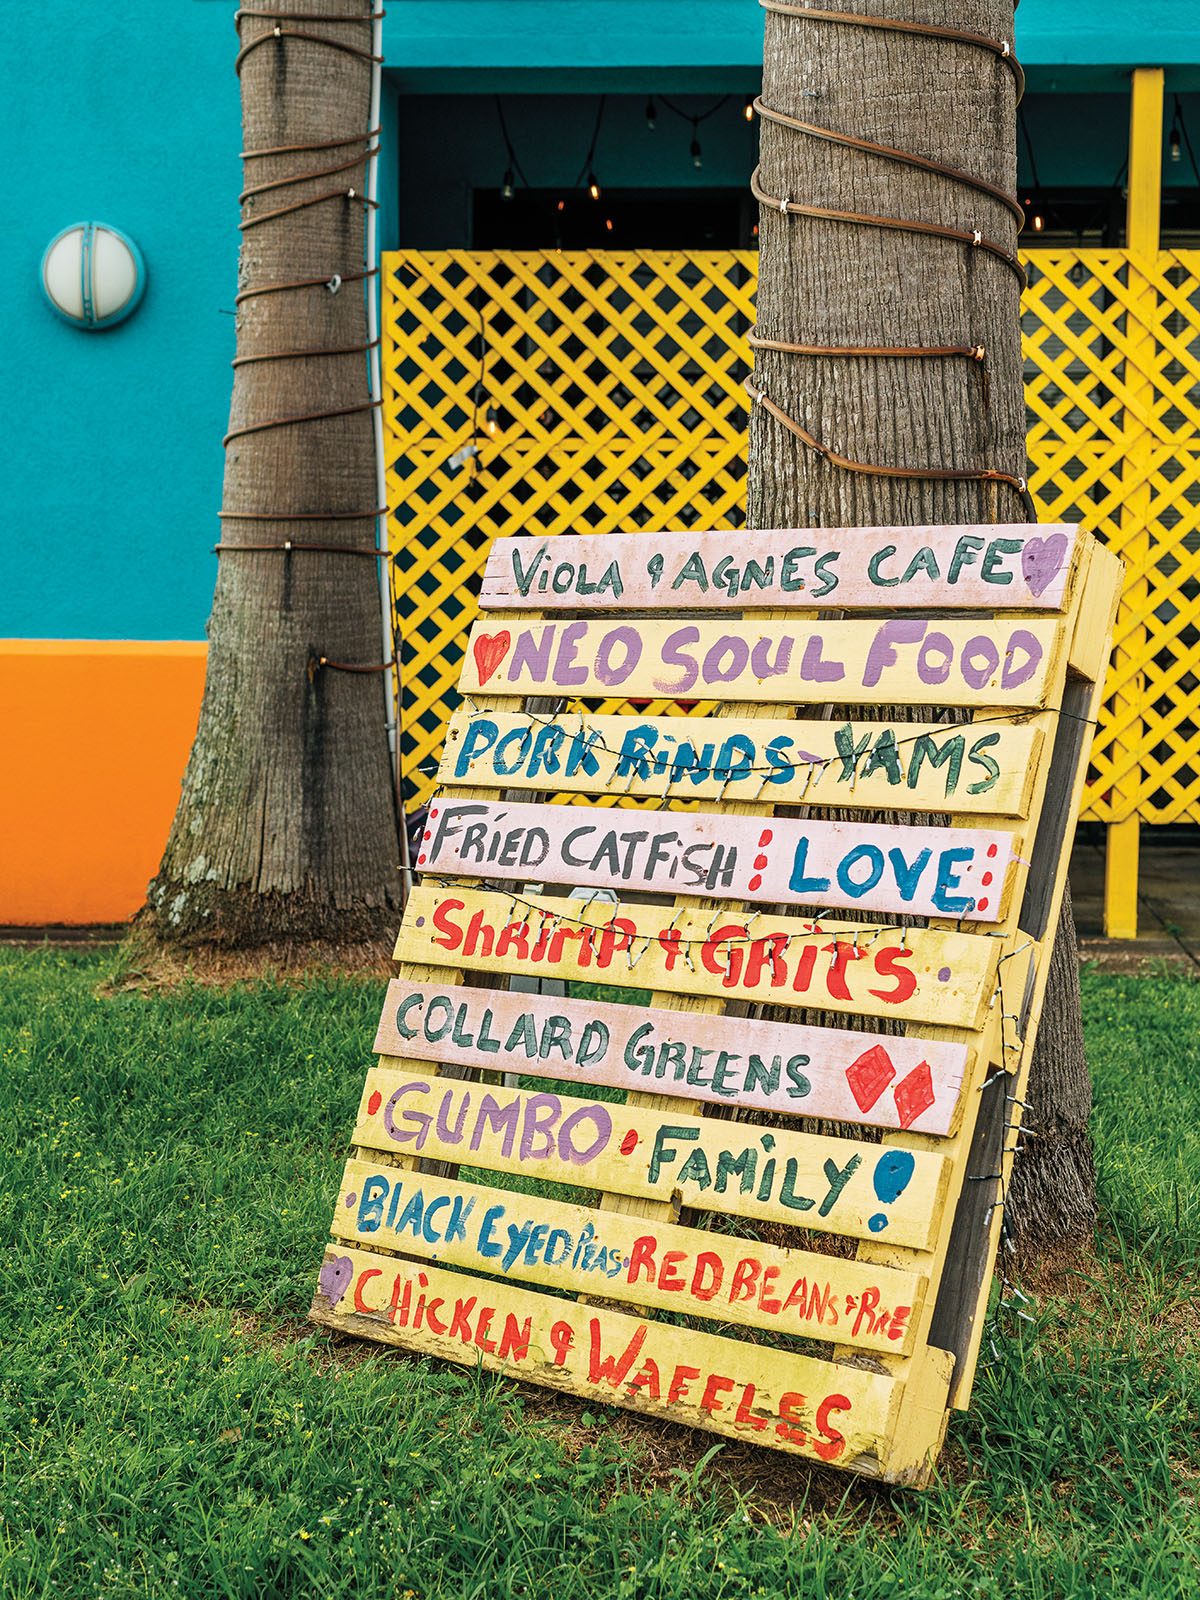 Menu items, including fried catfish, shrimp and grits, collard greens, gumbo, and black eyed peas are hand-painted in bright colors on a wooden pallet